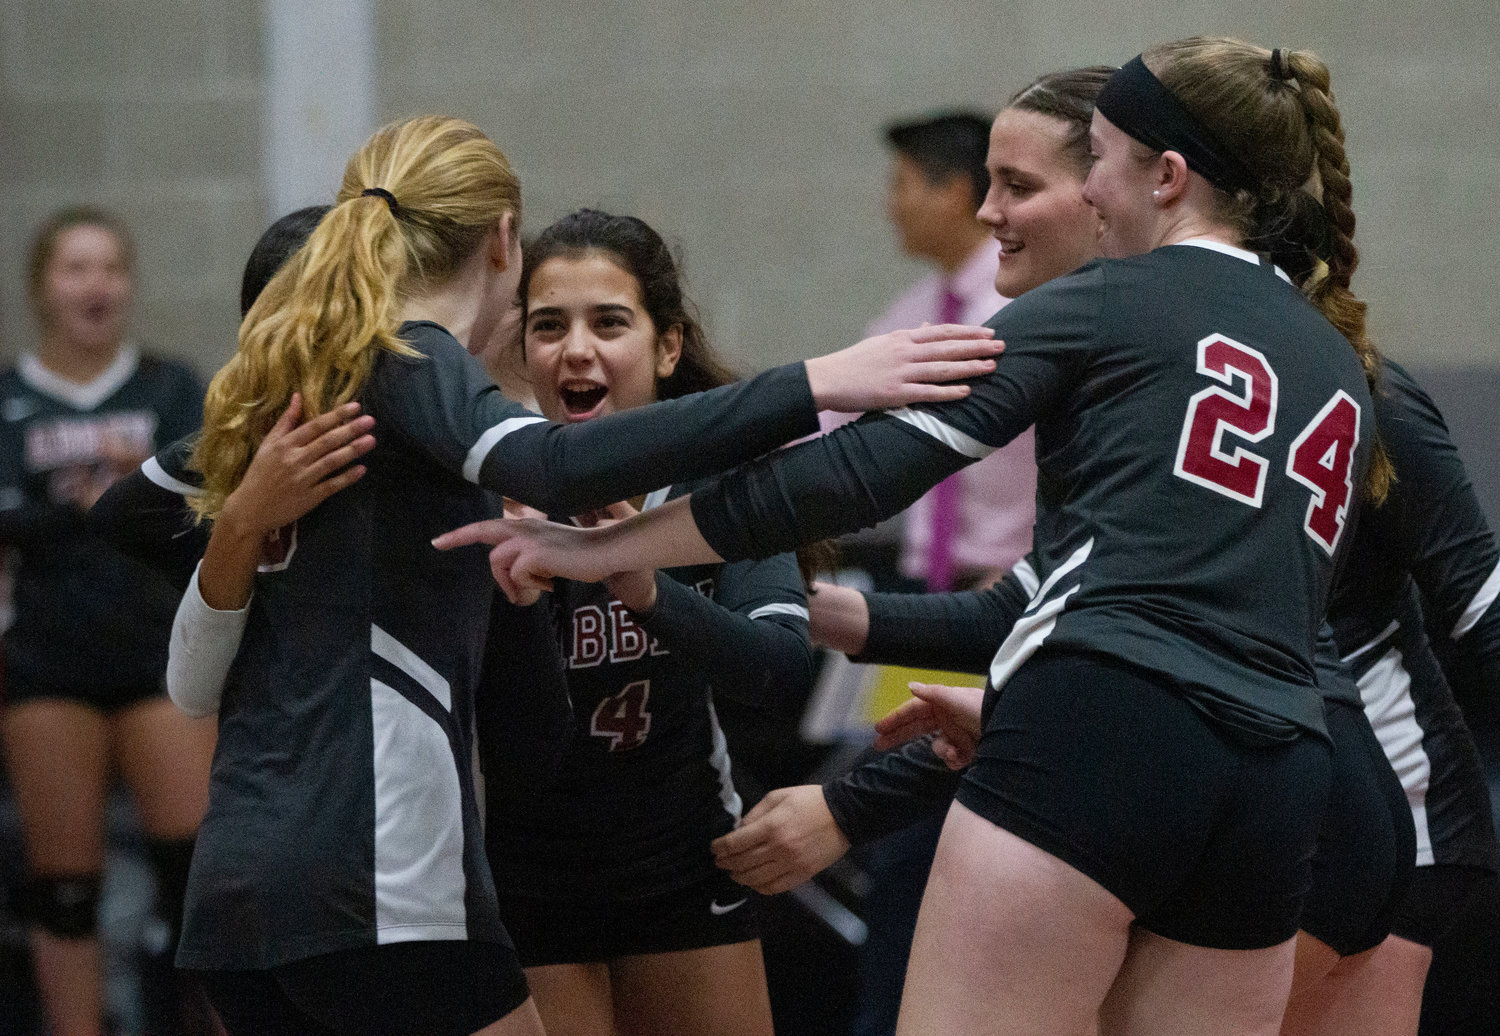 Maria Amian Parames (middle) celebrates with teammates after a point.